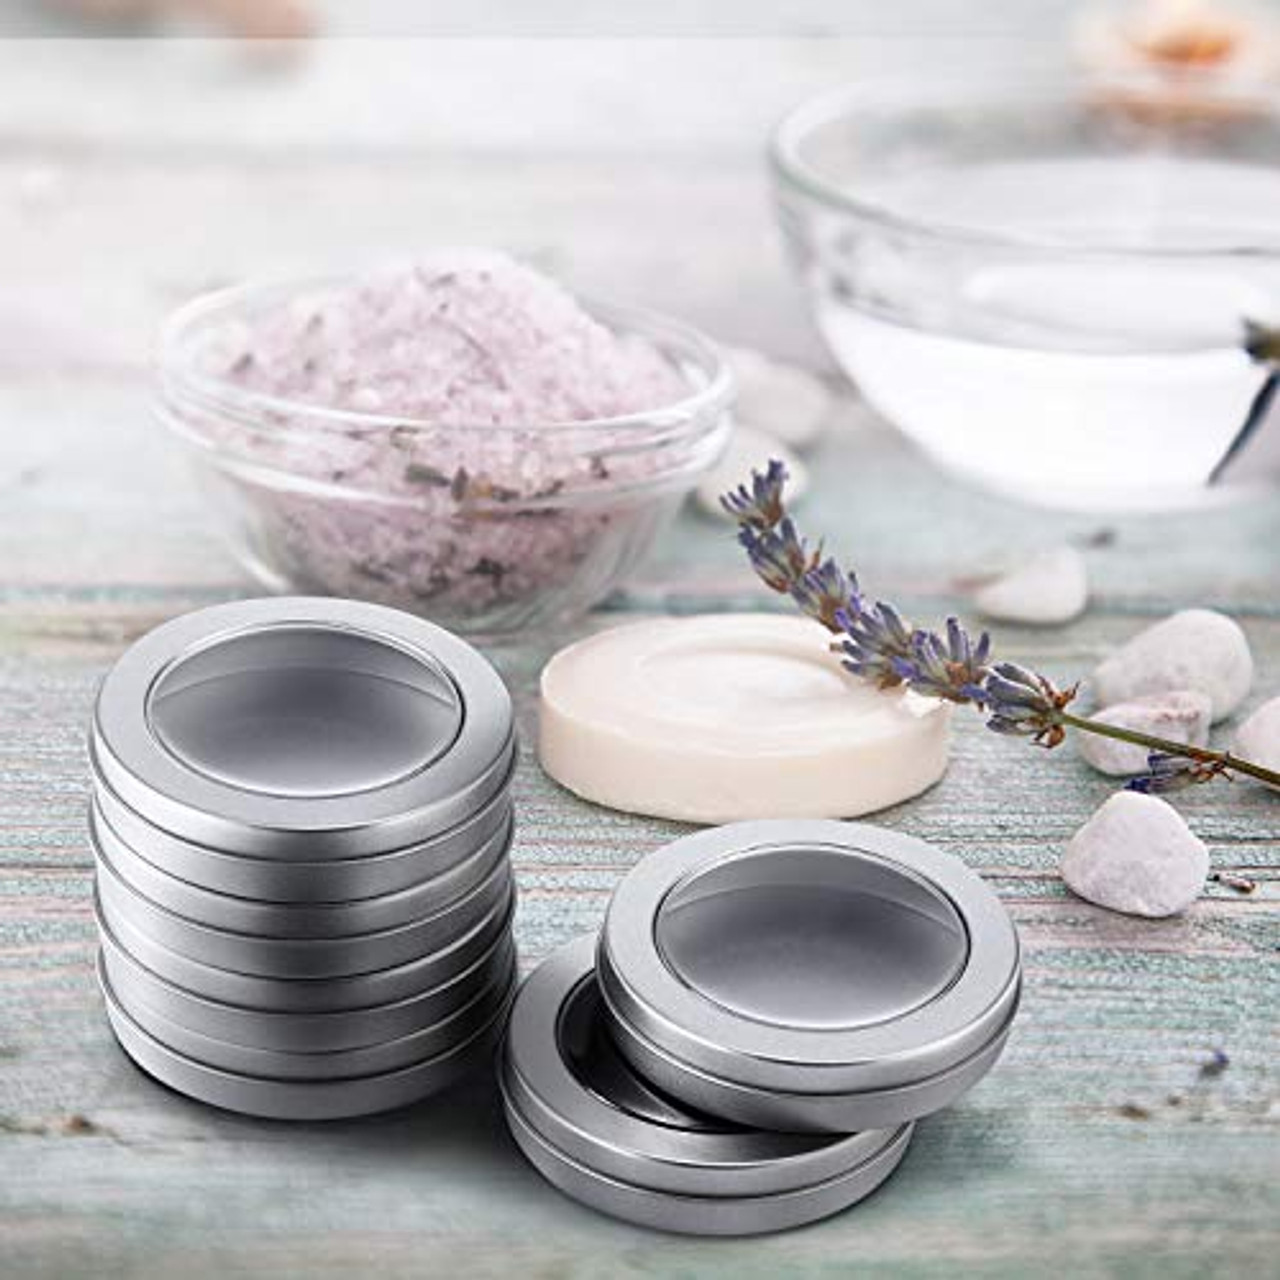 ZOENHOU 64 Pack 2 Ounce Metal Tin Cans, Clear Top Lid Round Empty Container  Tin Cans, Refillable Spice Candle Tins for Gift Giving, Candle Making, Lip  Balm